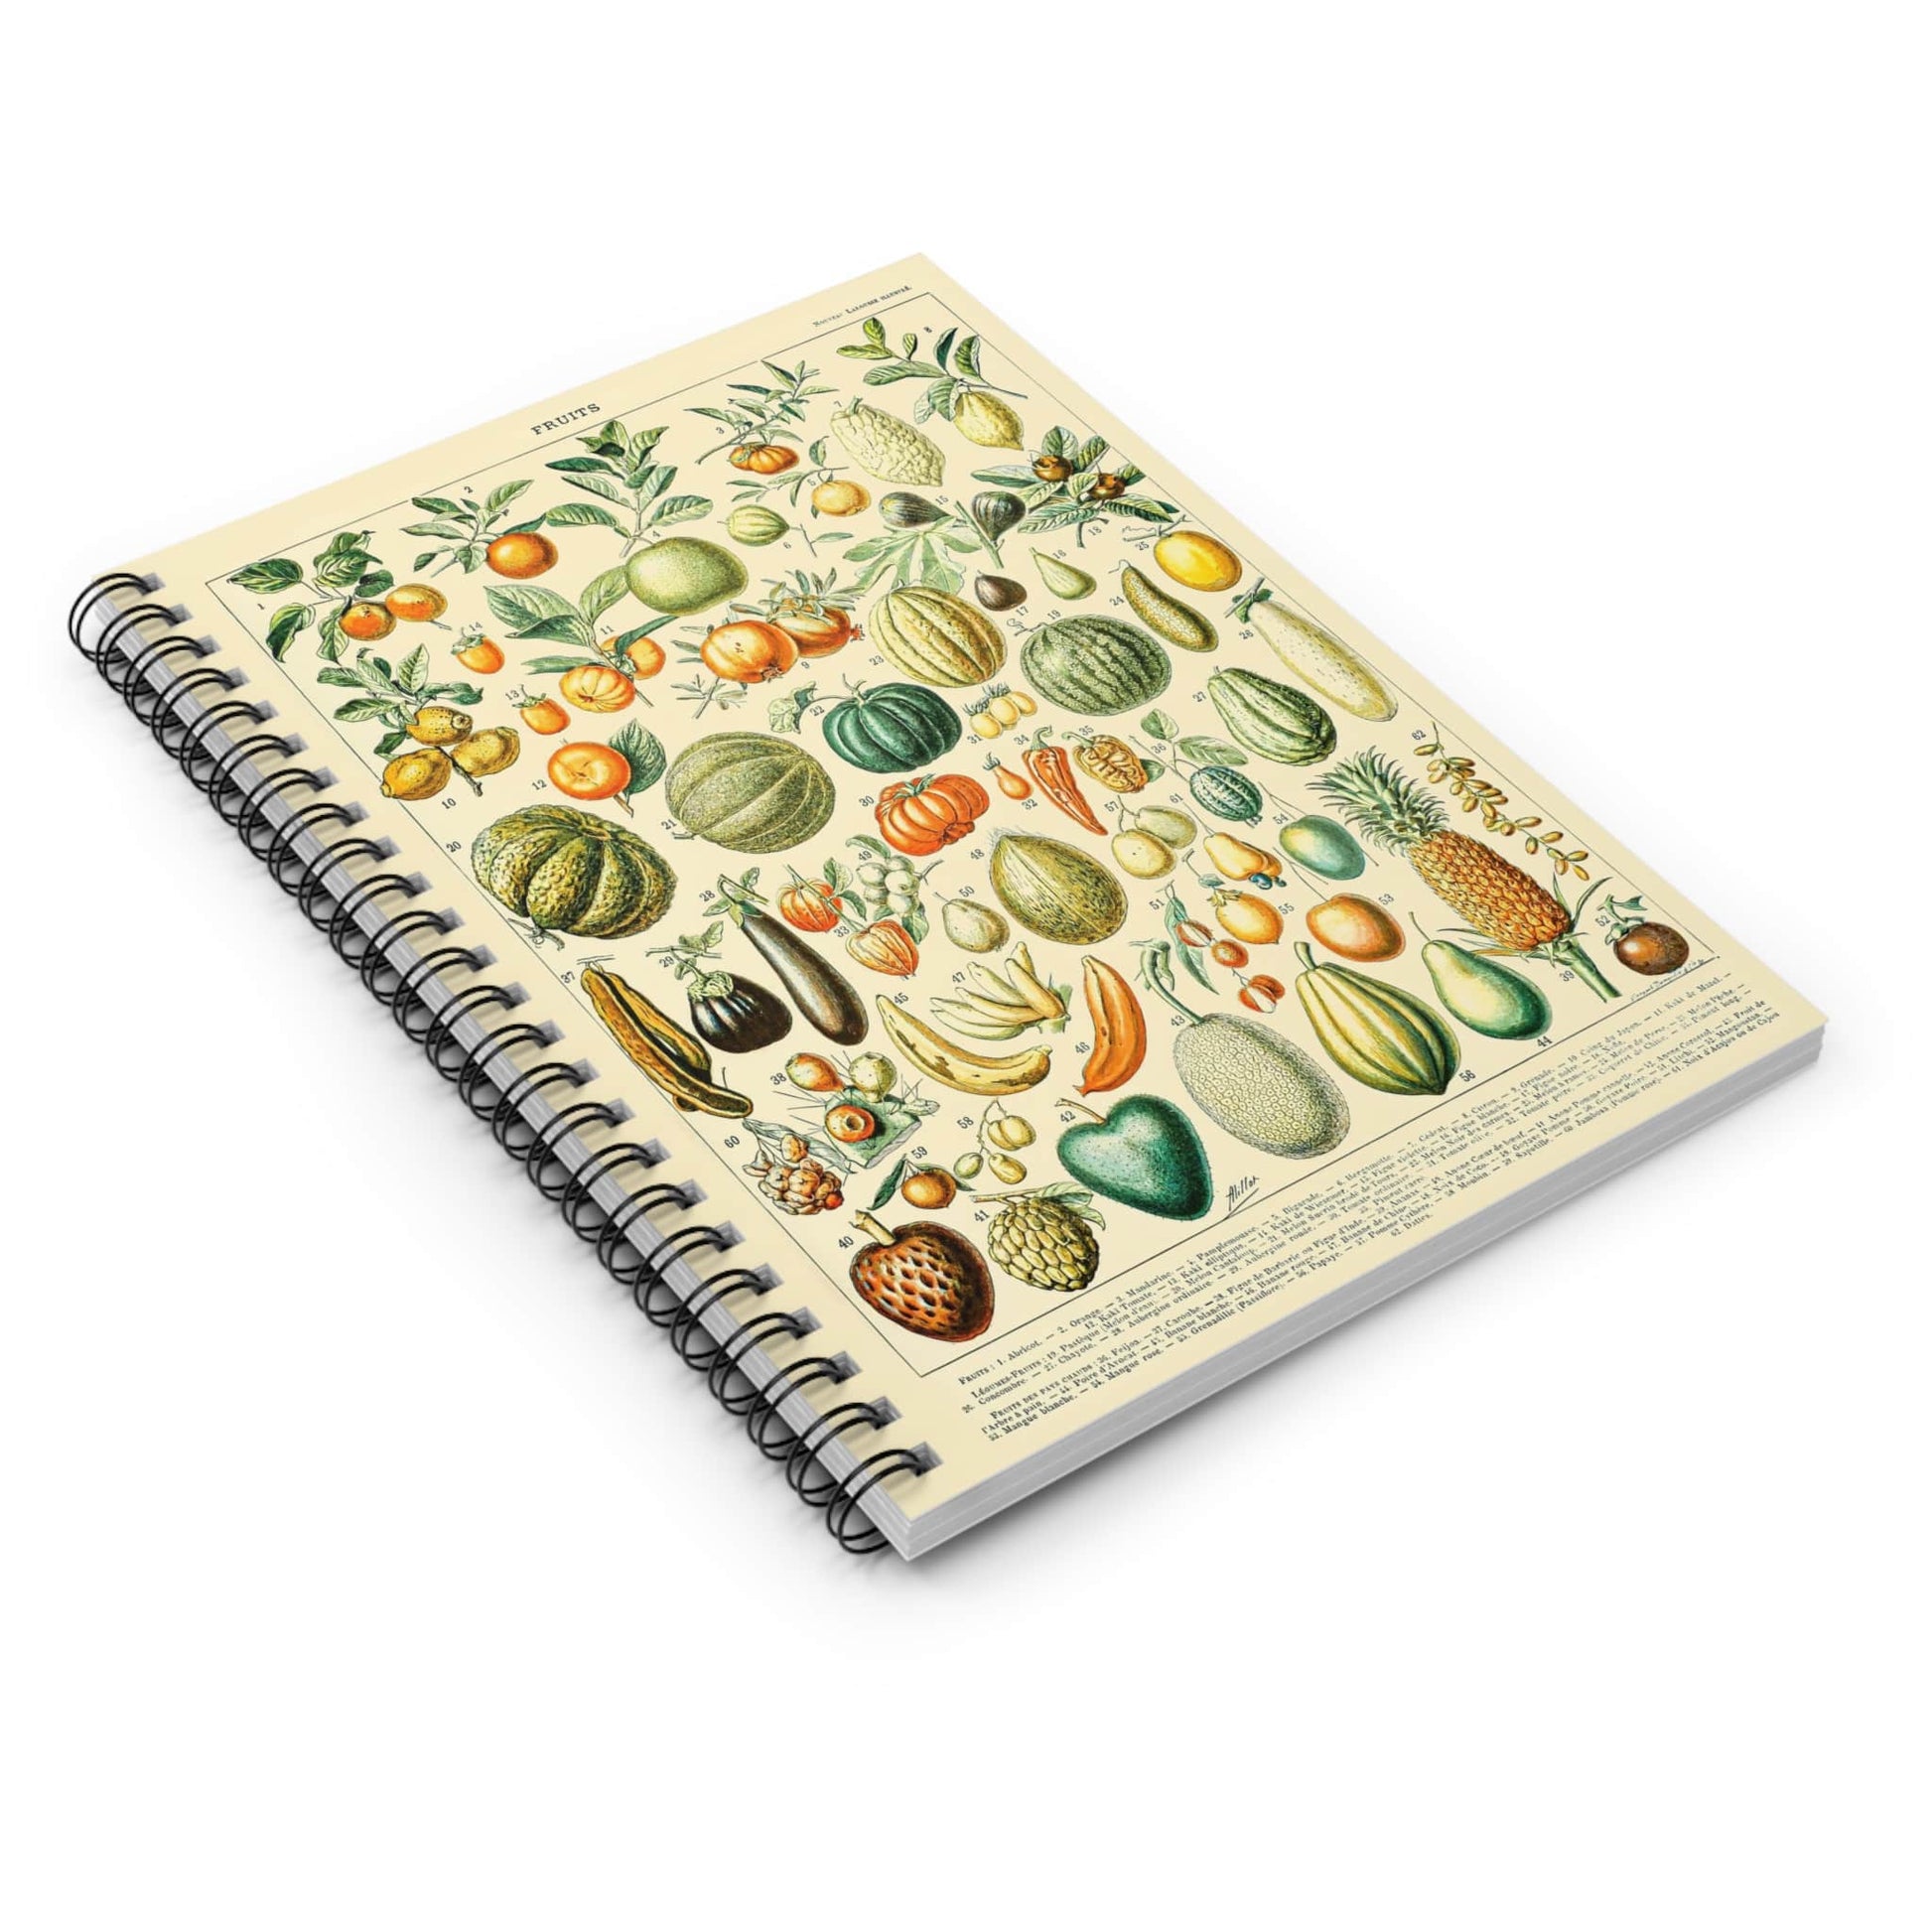 Harvest Spiral Notebook Laying Flat on White Surface